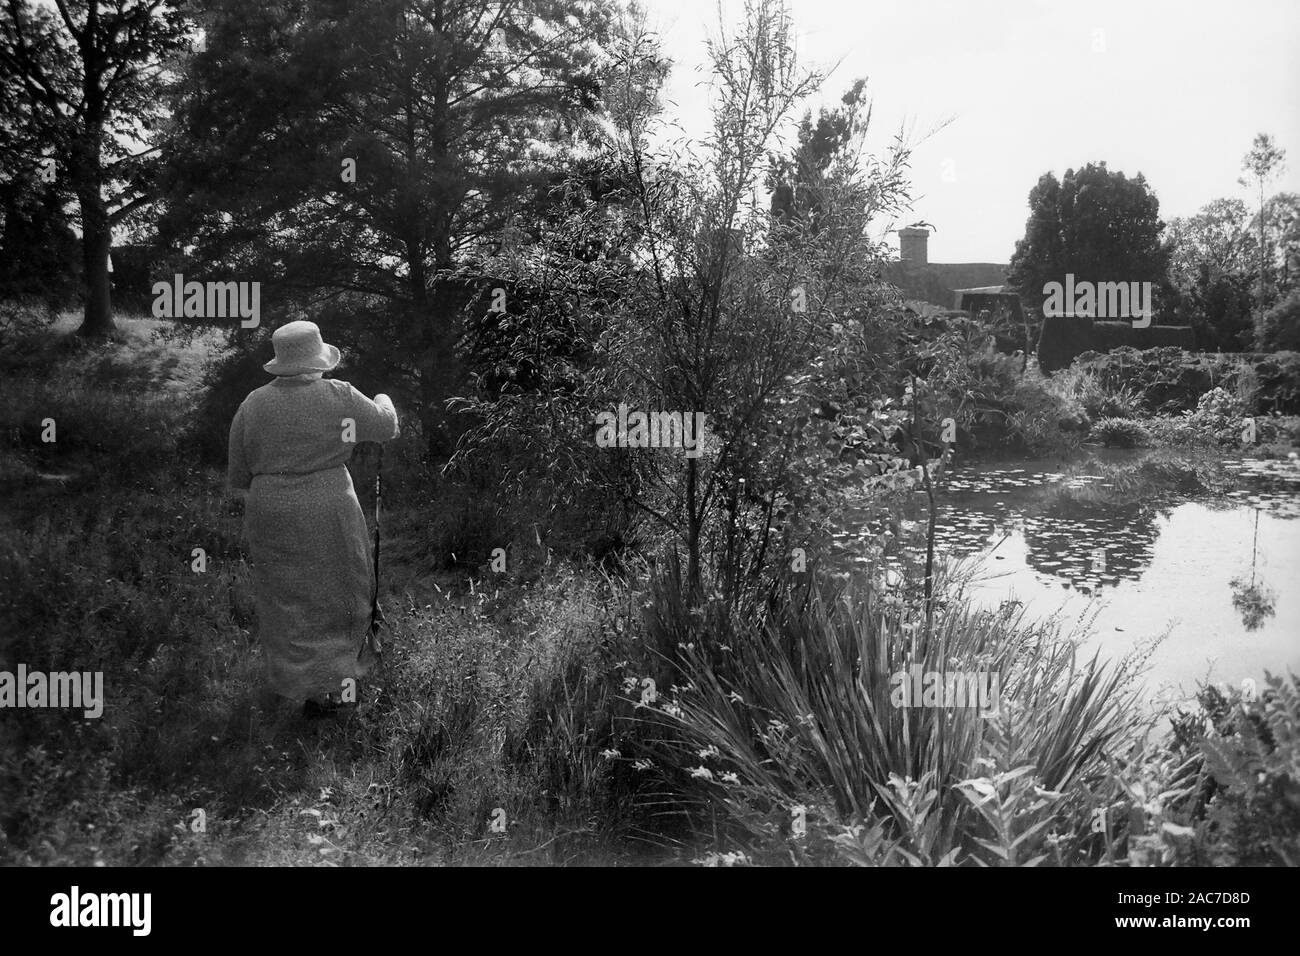 Old lady in a fine frock and hat by the Horse Pond, enjoying Christopher Lloyd's garden at Great Dixter, East Sussex.  Old black and white film photograph, circa 1980 Stock Photo